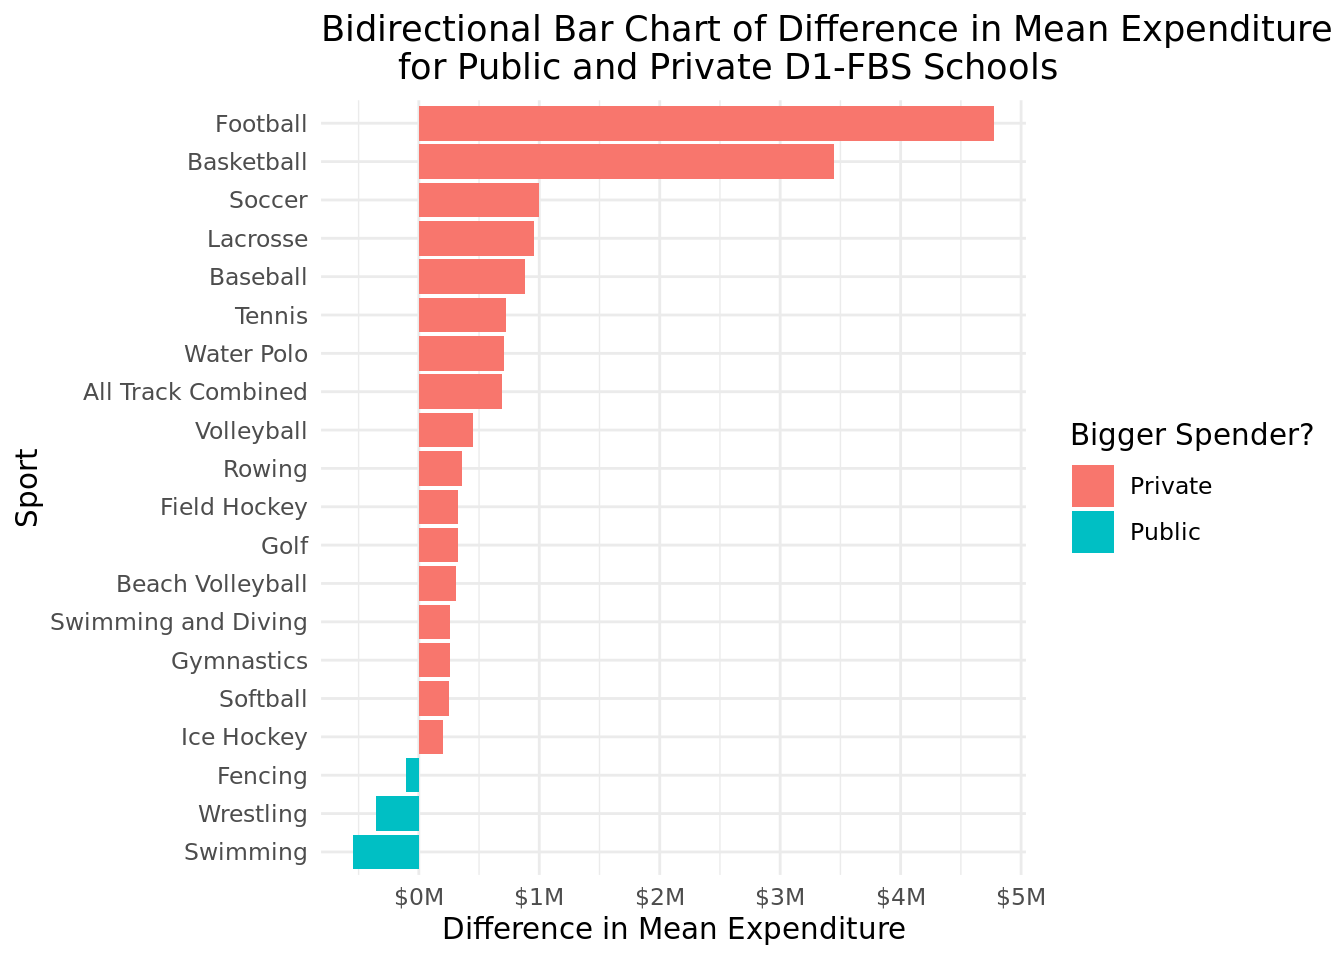 Bidirectional Bar Chart of Difference in Mean Expenditure for Public and Private D1-FBS Schools.